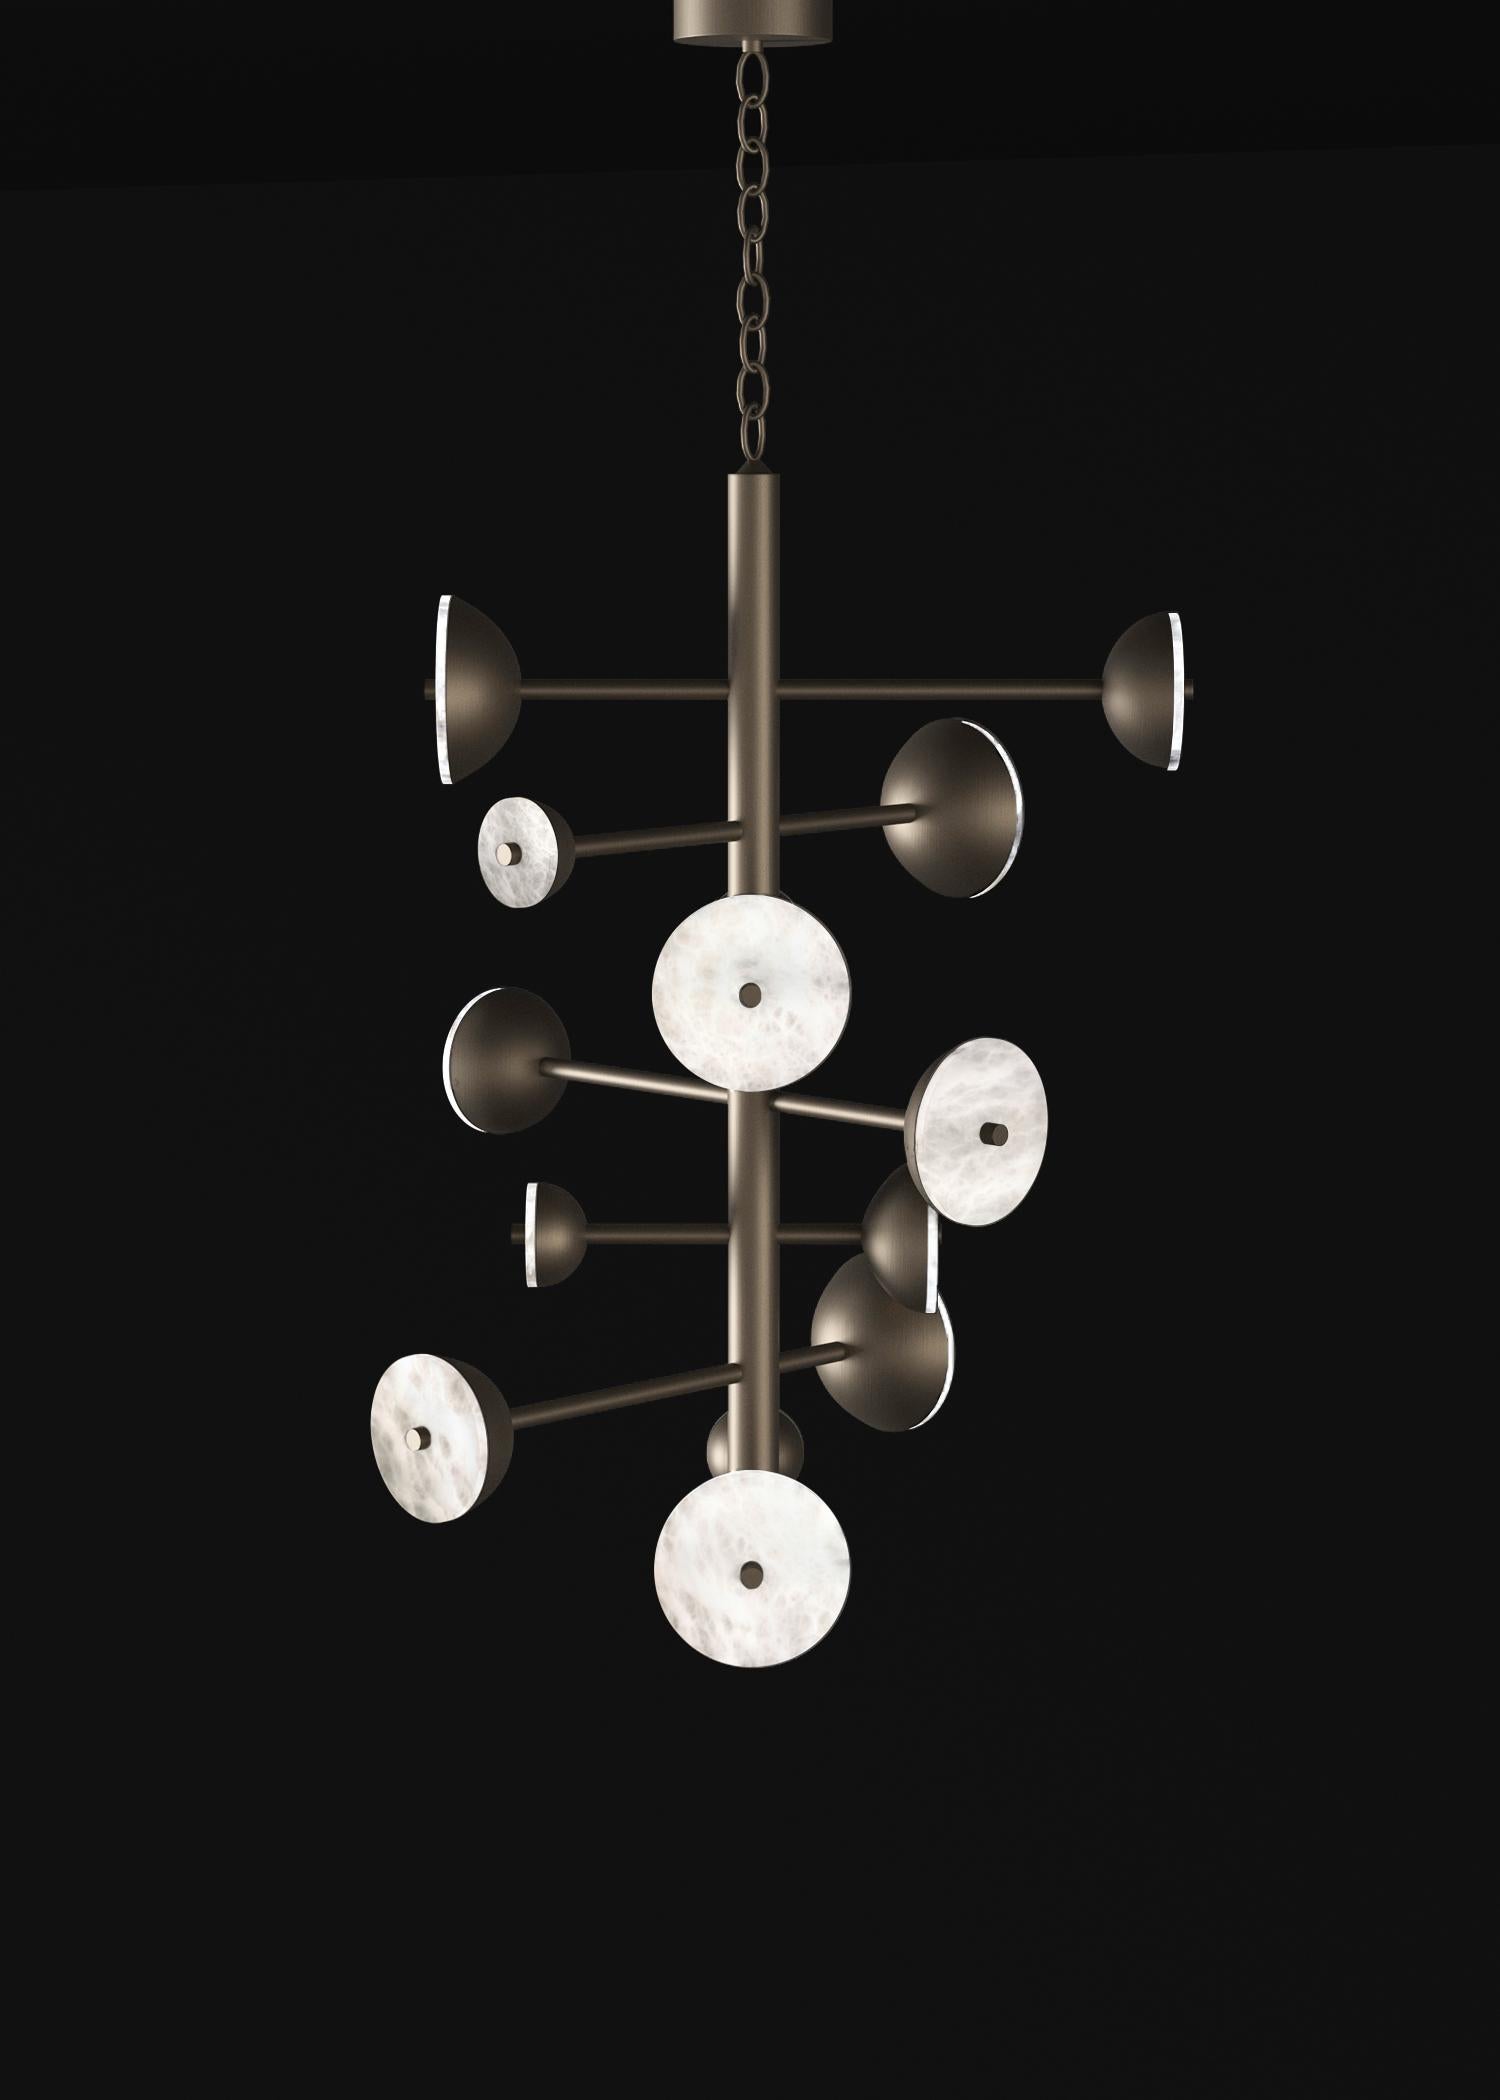 Teti Brushed Burnished Metal Chandelier by Alabastro Italiano
Dimensions: D 74,5 x W 77,5 x H 110 cm.
Materials: White alabaster and metal.

Available in different finishes: Shiny Silver, Bronze, Brushed Brass, Ruggine of Florence, Brushed